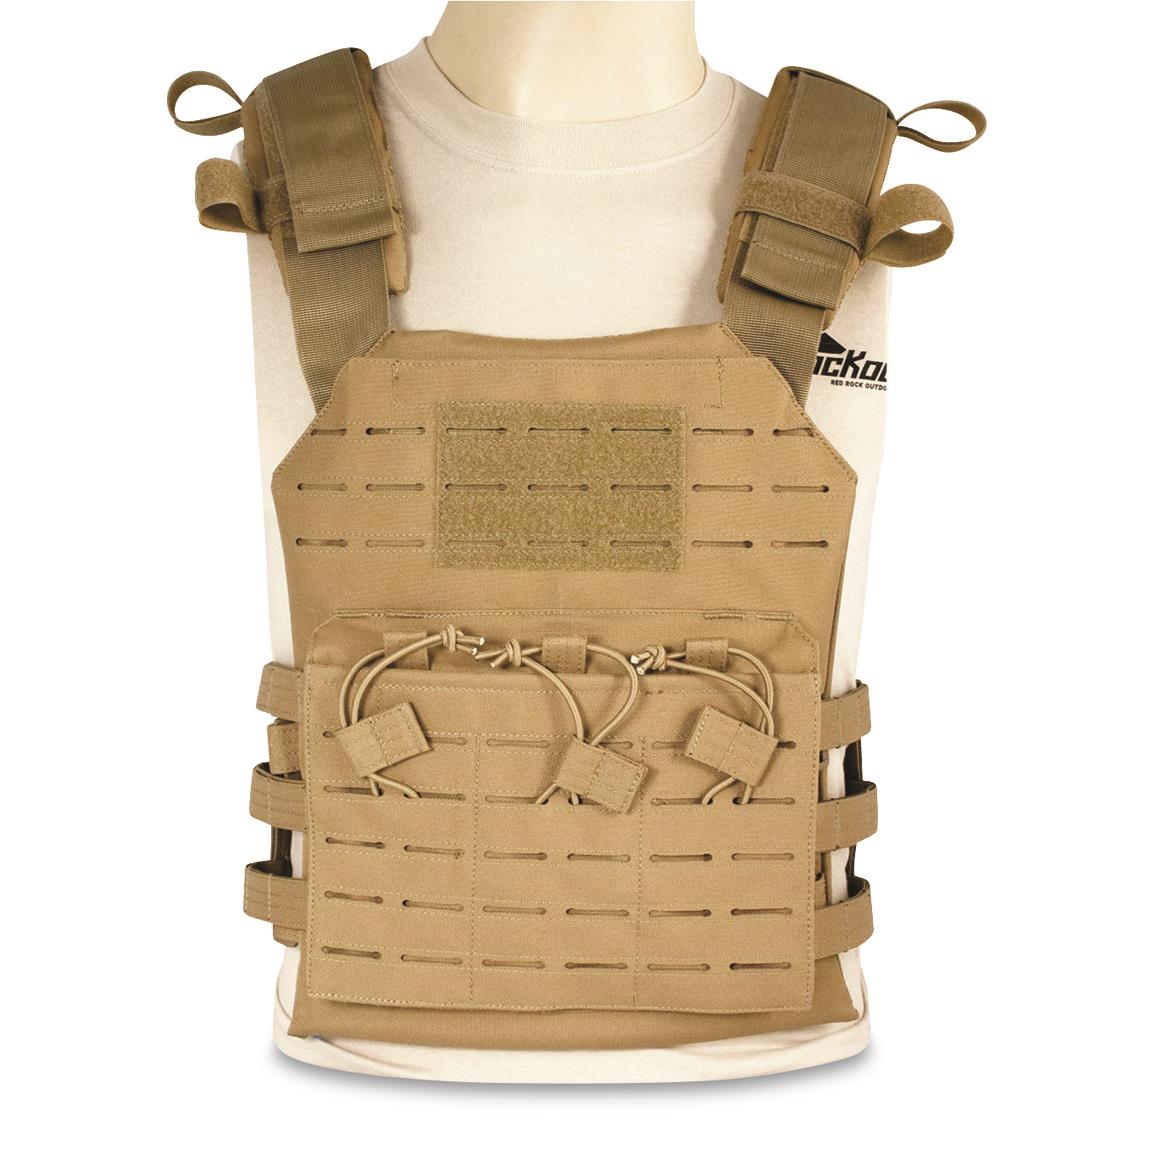 Laser-cut (MOLLE compatible) panels for adding pouches, holsters, or similar, Coyote